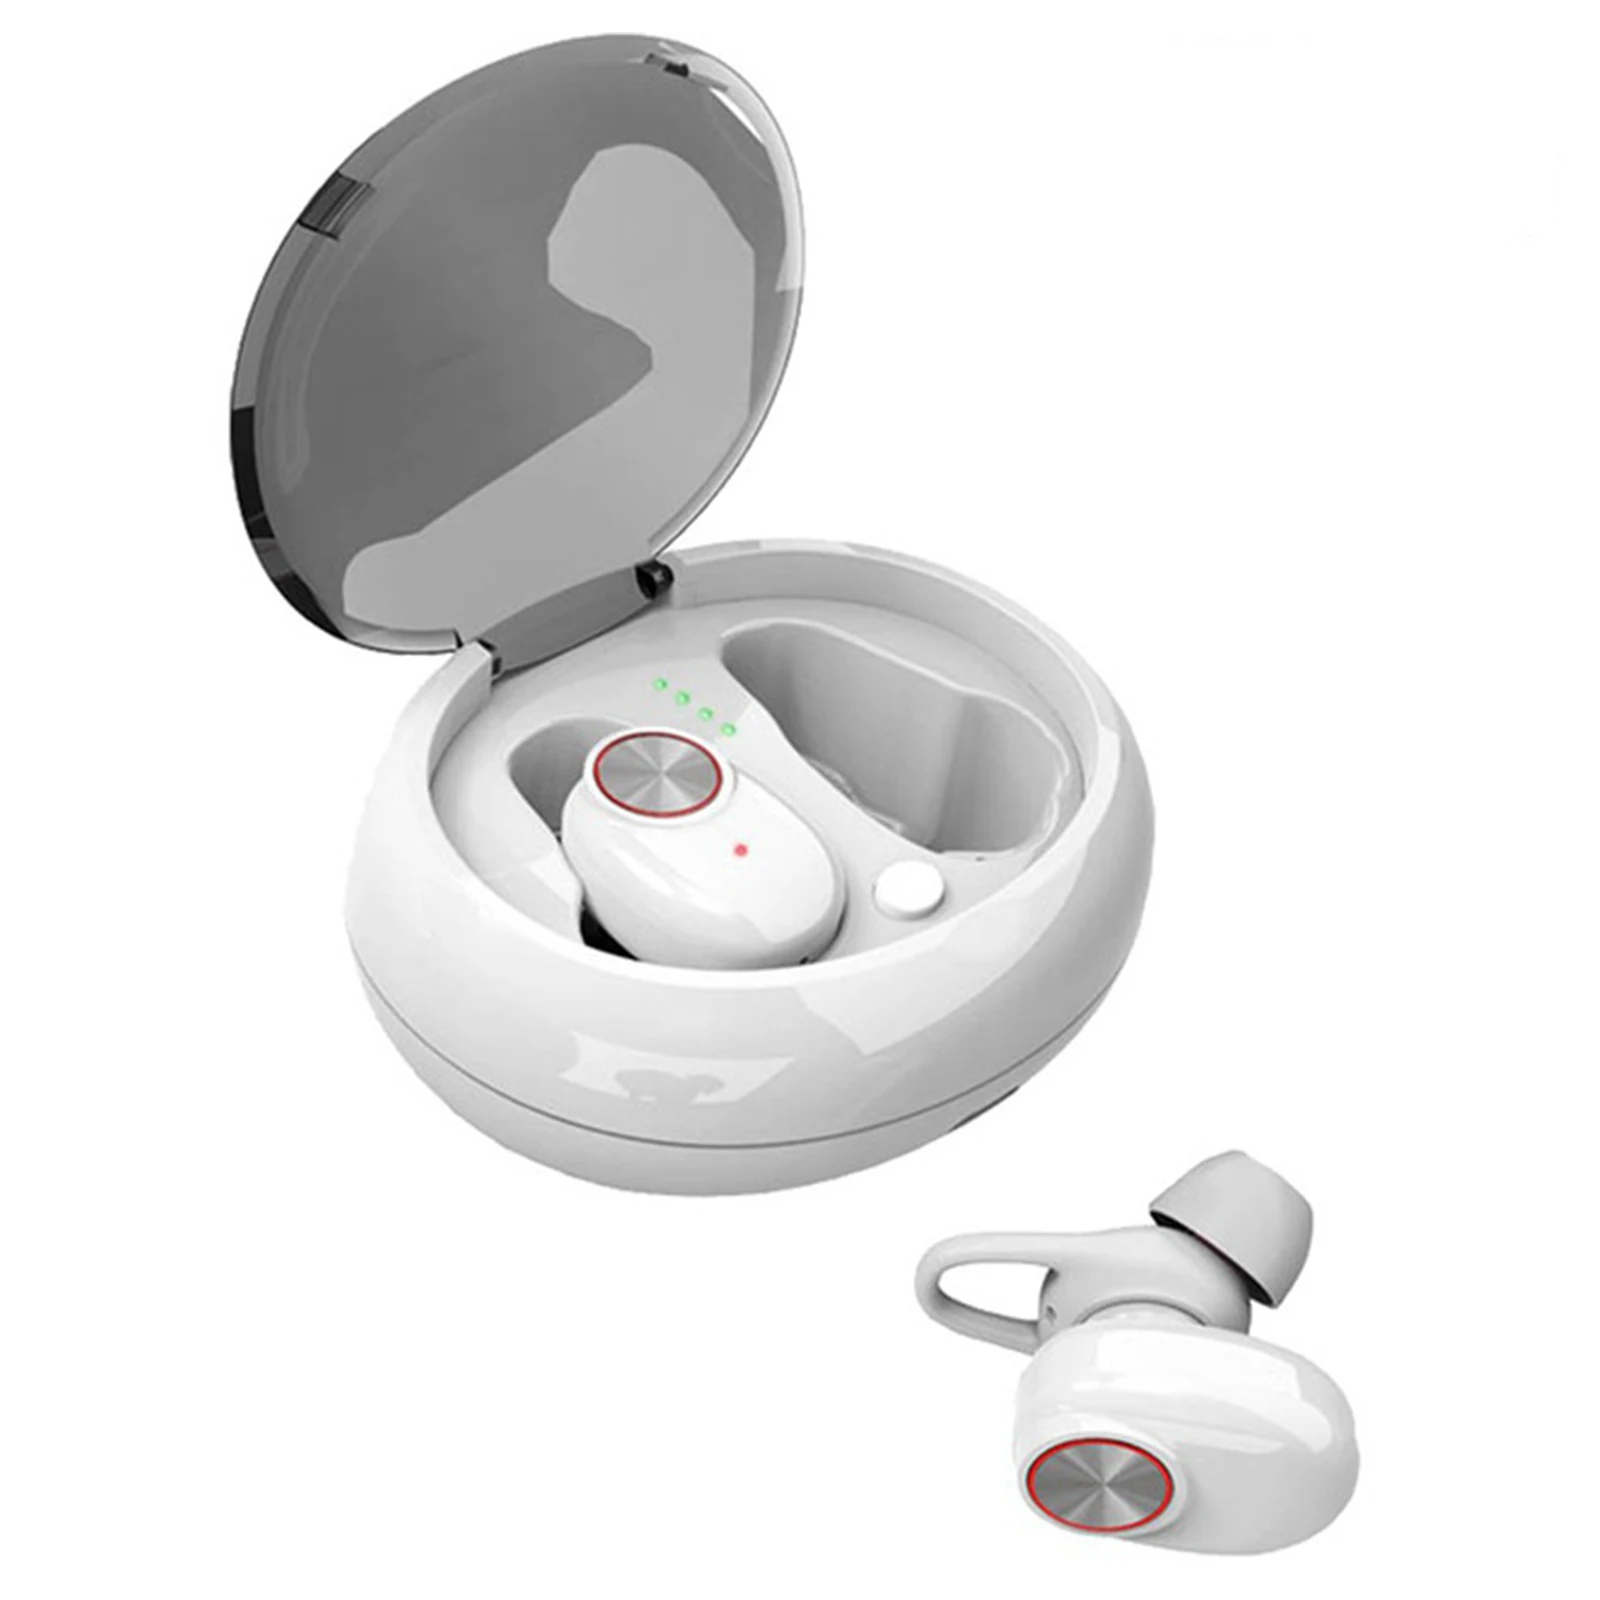 Mini V5 Sports In-Ear Hifi Stereo Car Bluetooth TWS Earbuds Headphone with Mic w/ Charging Case Running